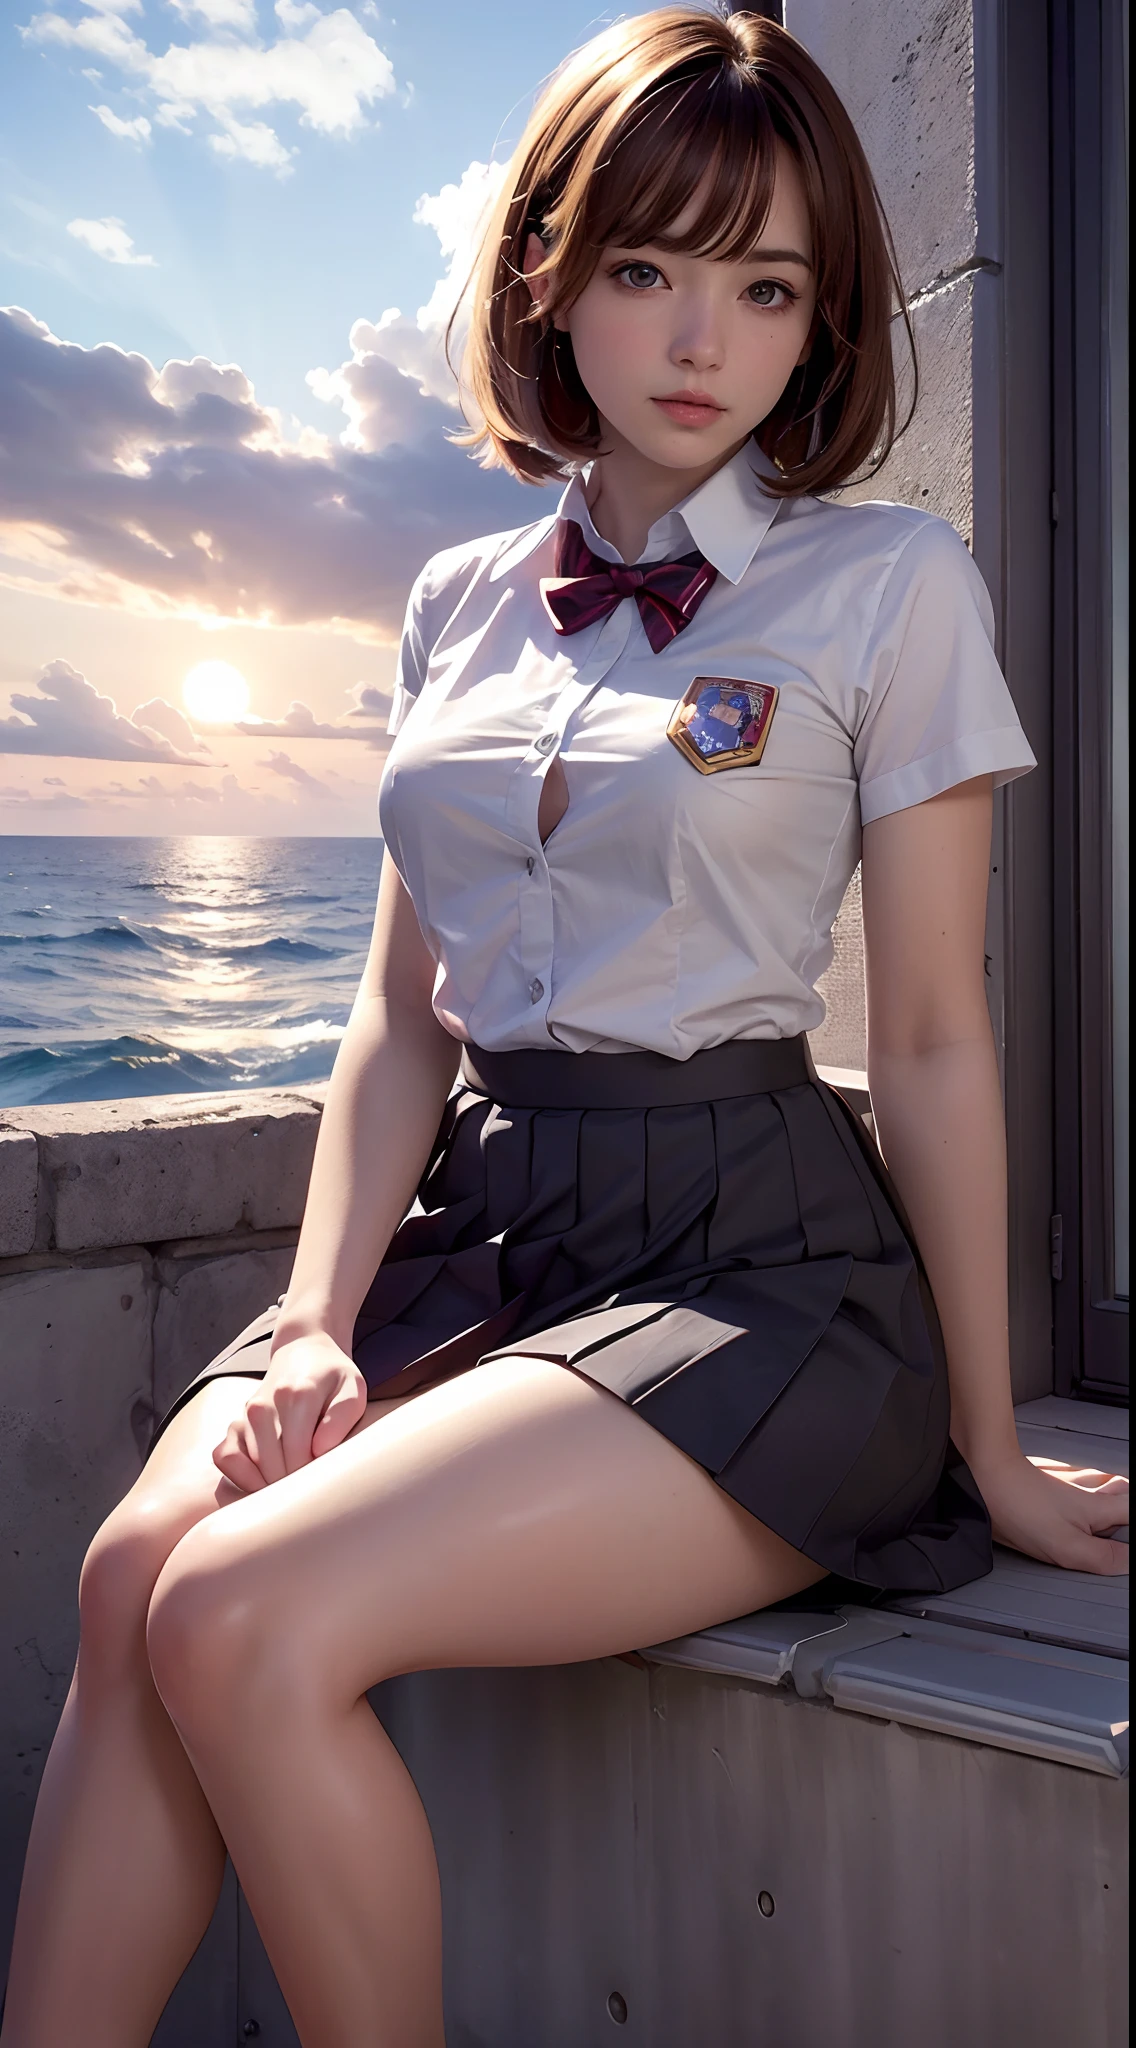 (Best quality, high resolution, Masterpiece :1.3), one pretty woman,
Against the background of orange sunset sky，Clouds and the sun sink into the sea, Sitting in a  was a beautiful high school girl. Her hair is light brown, It is medium Bob style. She wore a white shirt and pleated skirt as part of her uniform. She sat with her legs apart, Her eyes were glued to the camera. Create this scene from a low-angle shot.